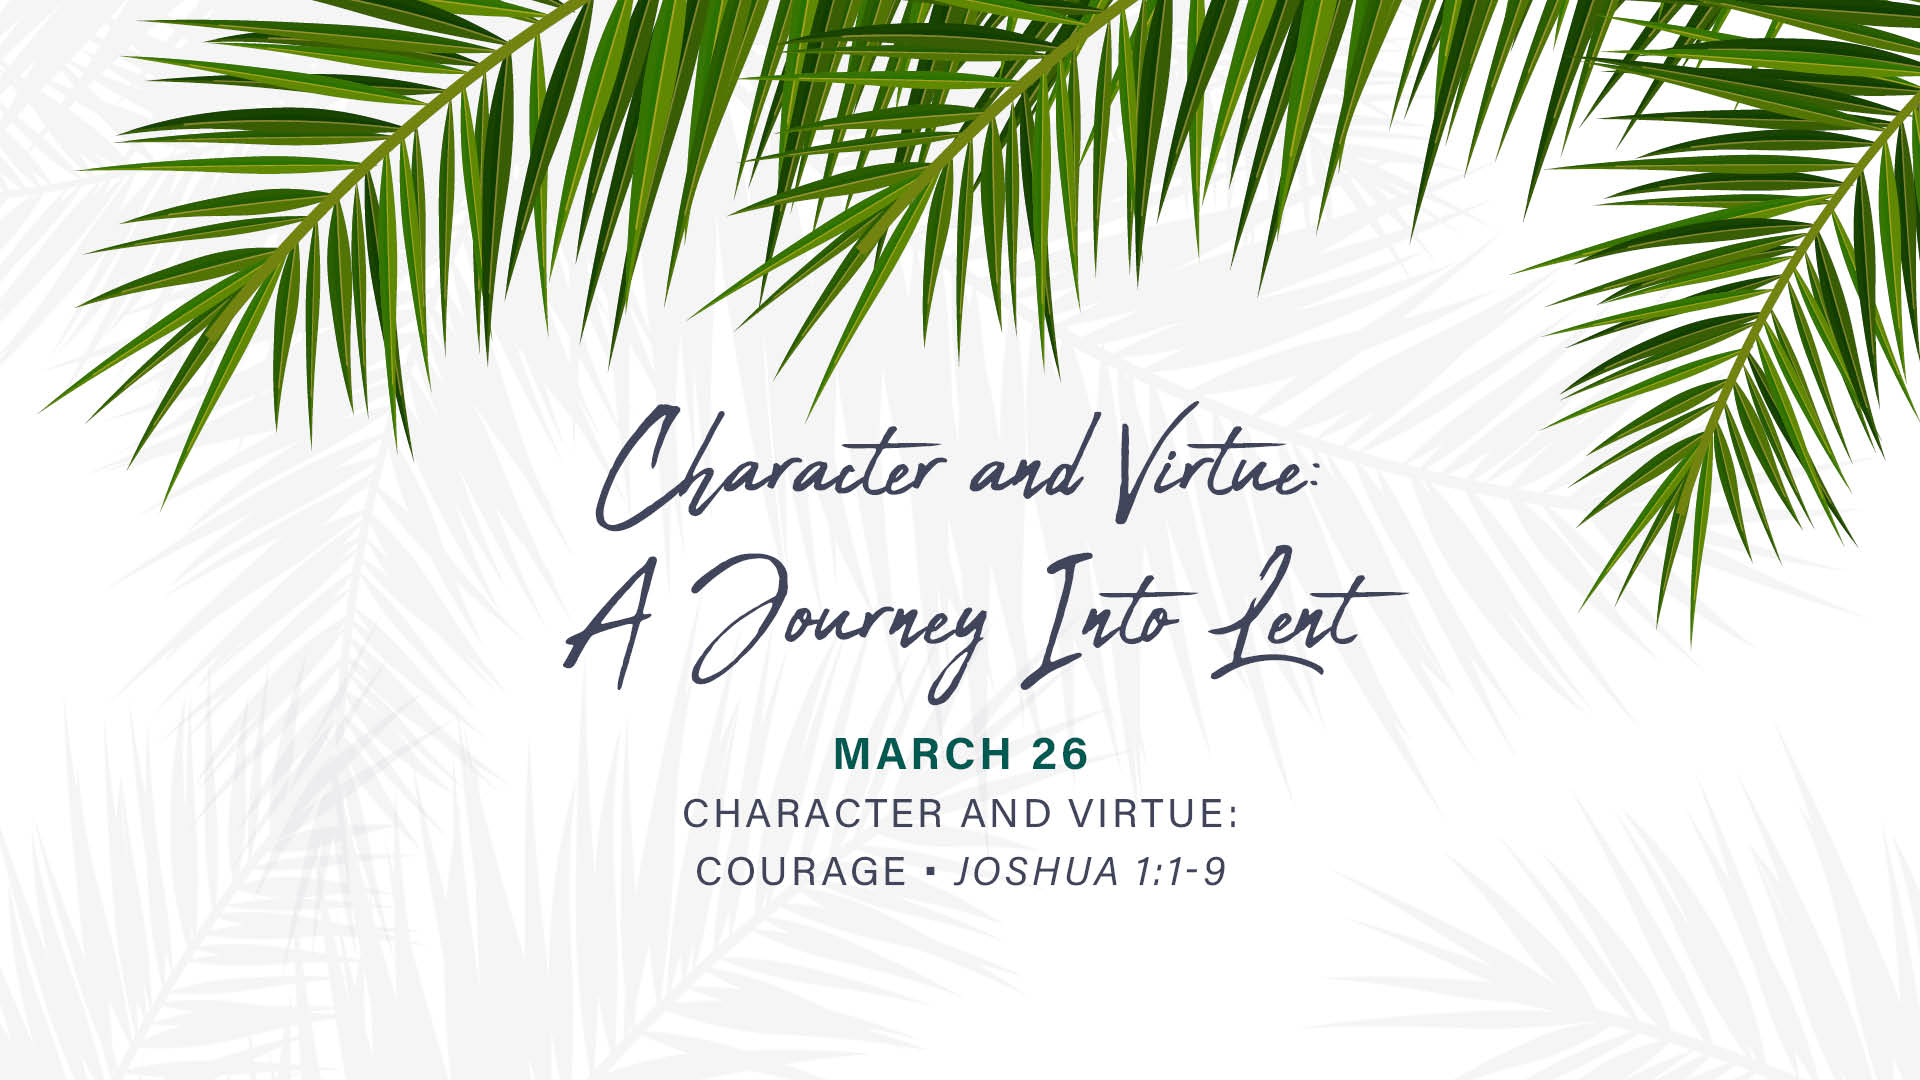 Character and Virtue: Courage